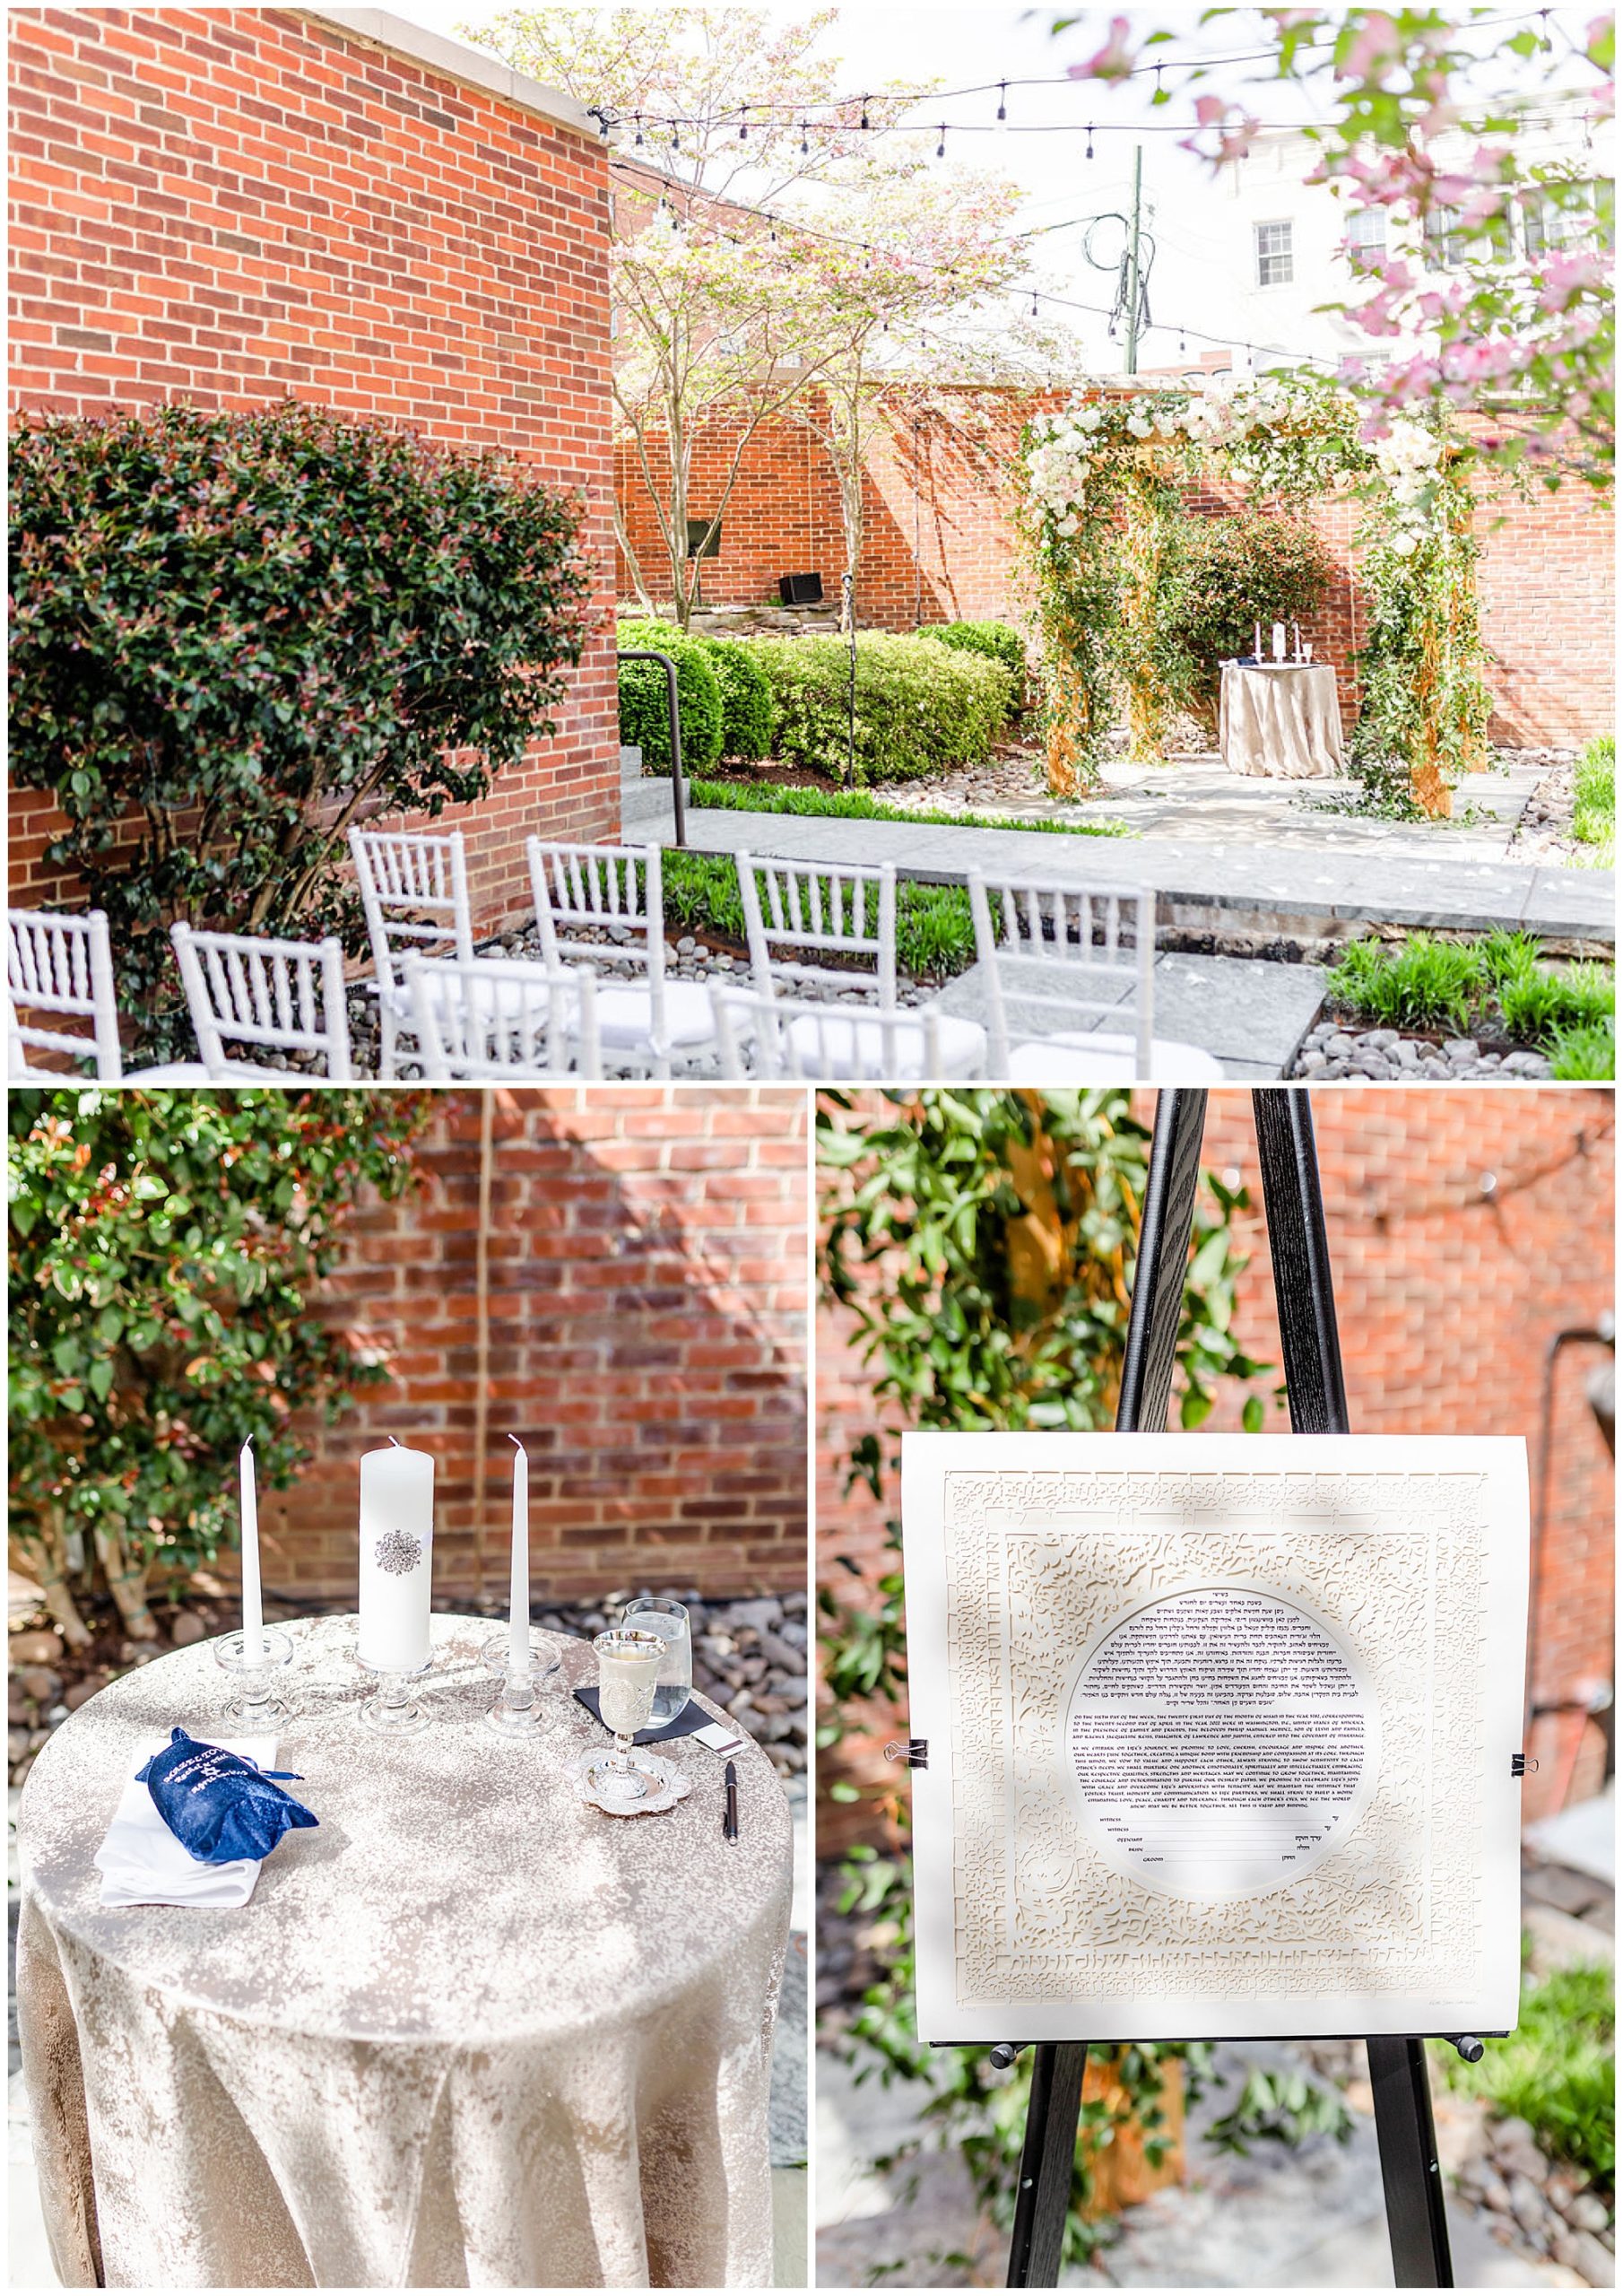 spring Ritz Carlton Georgetown wedding, Georgetown DC wedding, Georgetown Bride, Georgetown couple, DC couple, DC wedding venue, spring wedding, floral focused wedding, classic DC wedding, Ritz Carlton wedding, DC wedding photographer, Georgetown wedding photographer, Rachel E.H. Photography, ceremony venue, poster on easel, table at alter